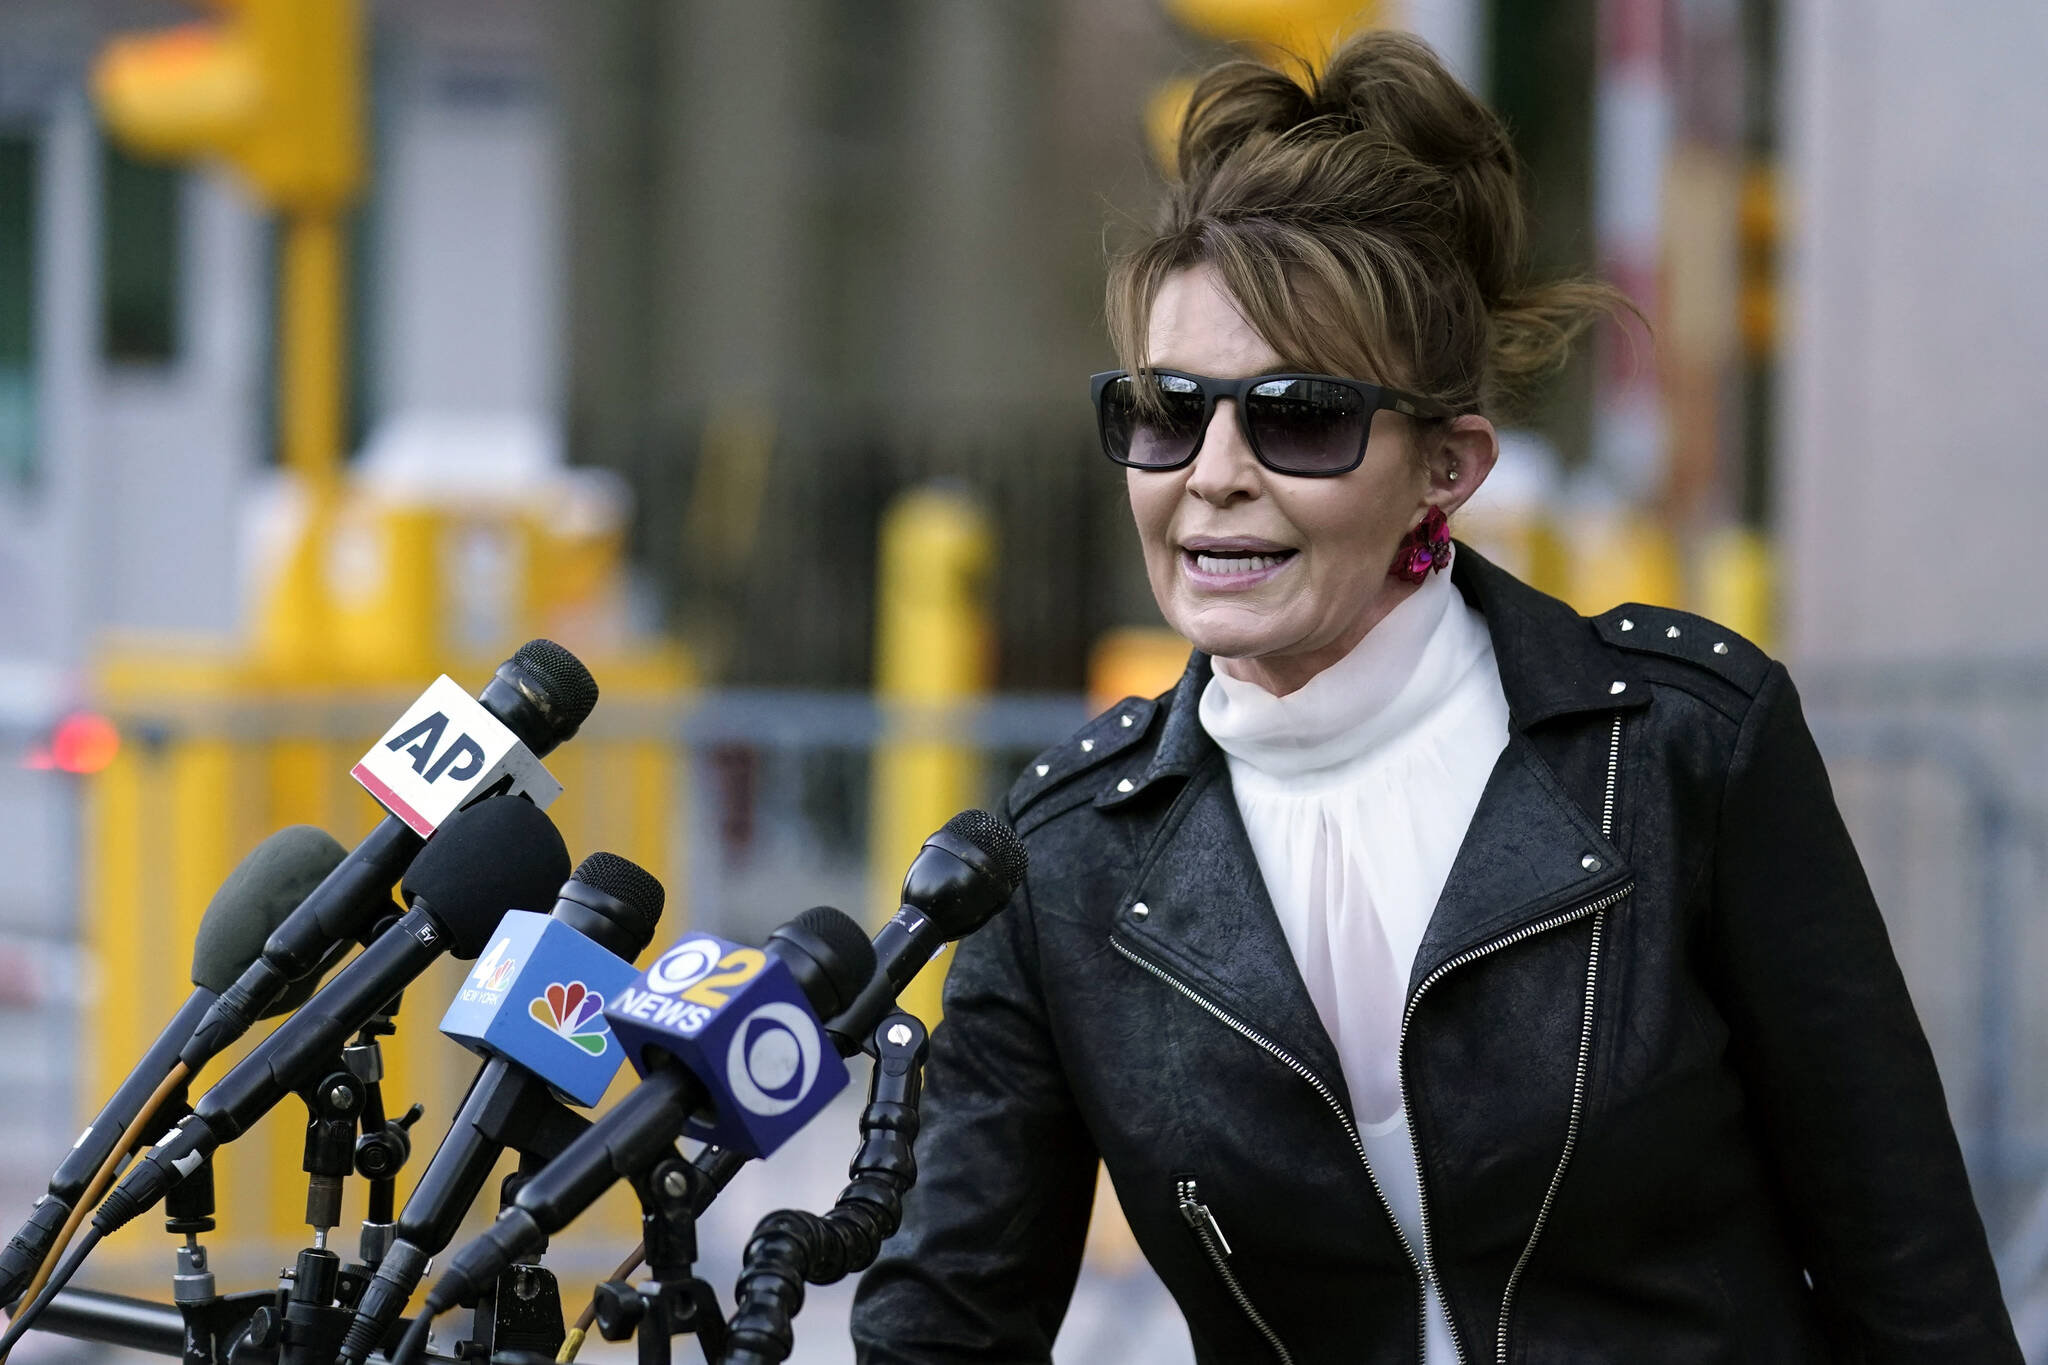 Former Alaska Gov. Sarah Palin speaks briefly to reporters as she leaves a courthouse in New York, Feb. 14, 2022. Palin is one of 48 candidates for Alaska's lone U.S. House seat, which was held for decades by Republican Rep. Don Young, who died last month. Palin says she's serious about the run though some critics have questioned her motivations. (AP Photo / Seth Wenig)